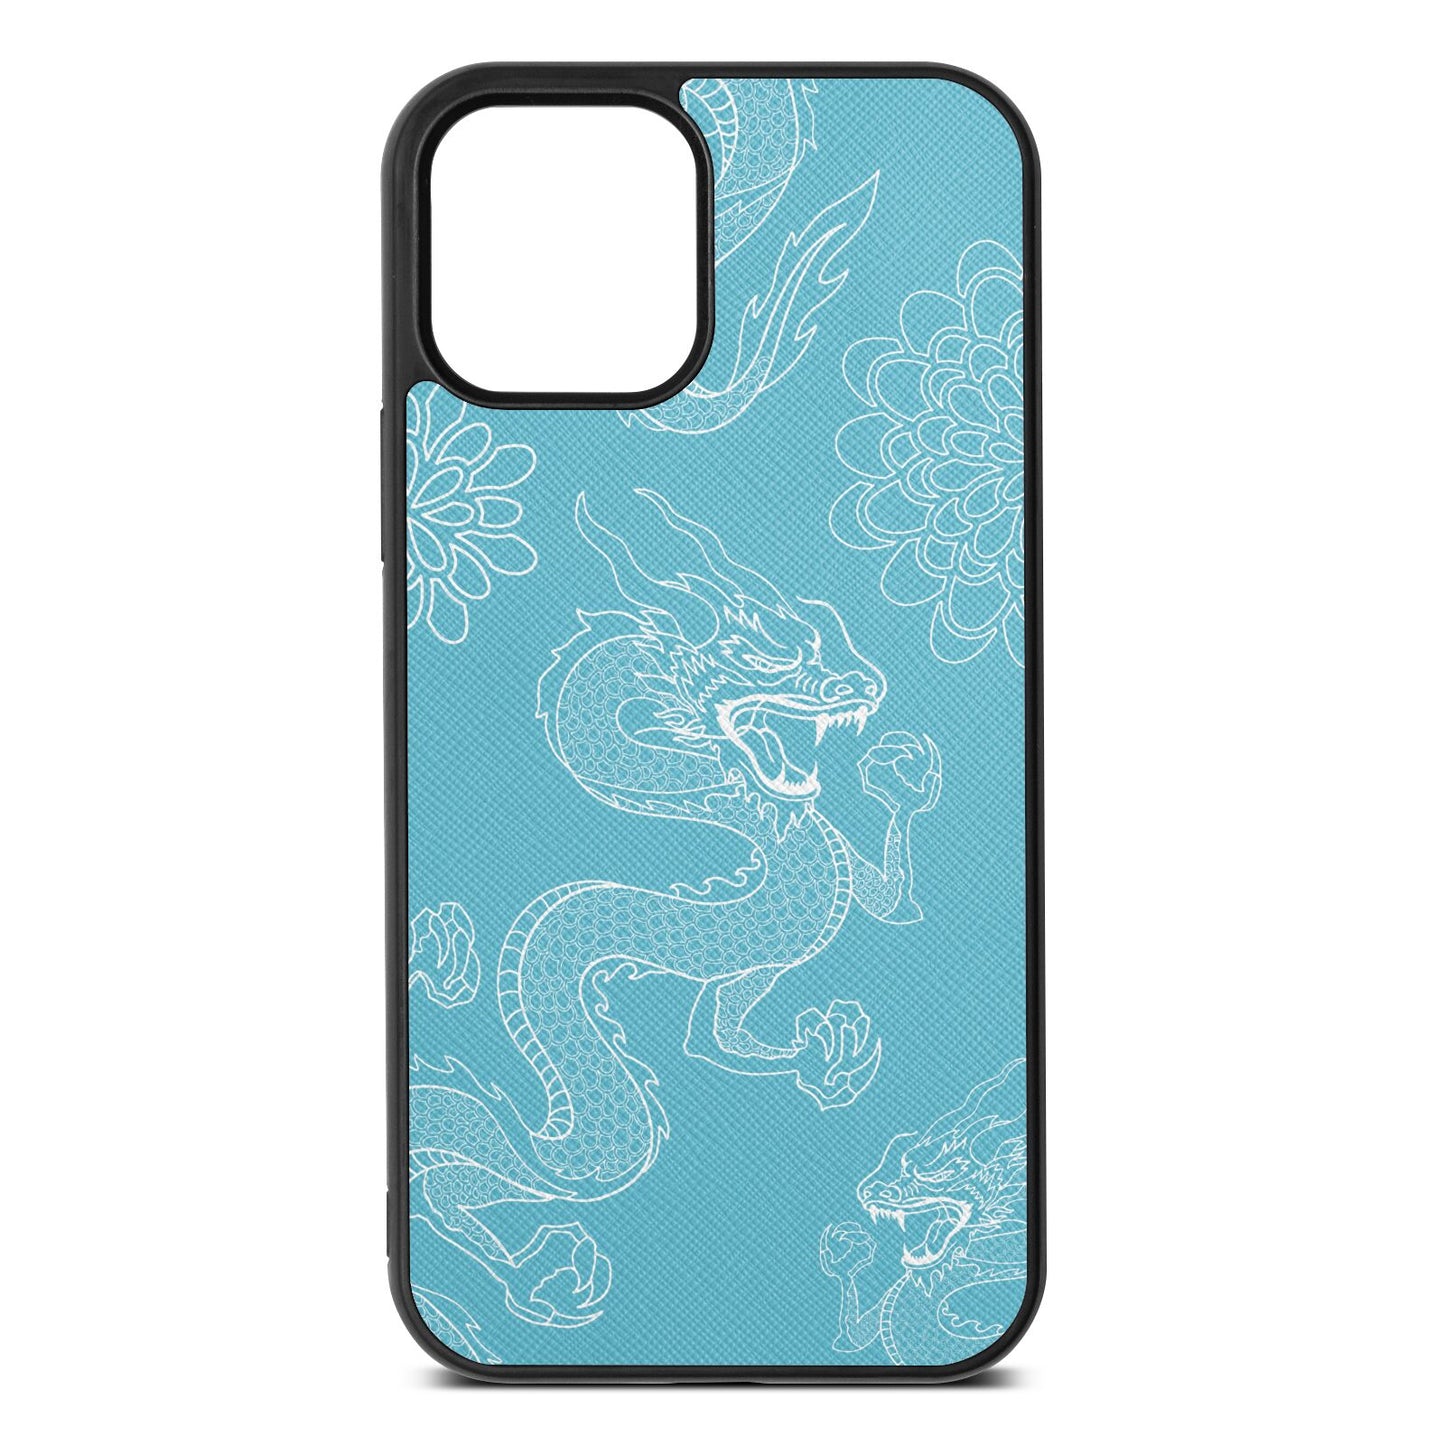 Dragons Sky Saffiano Leather iPhone 12 Case